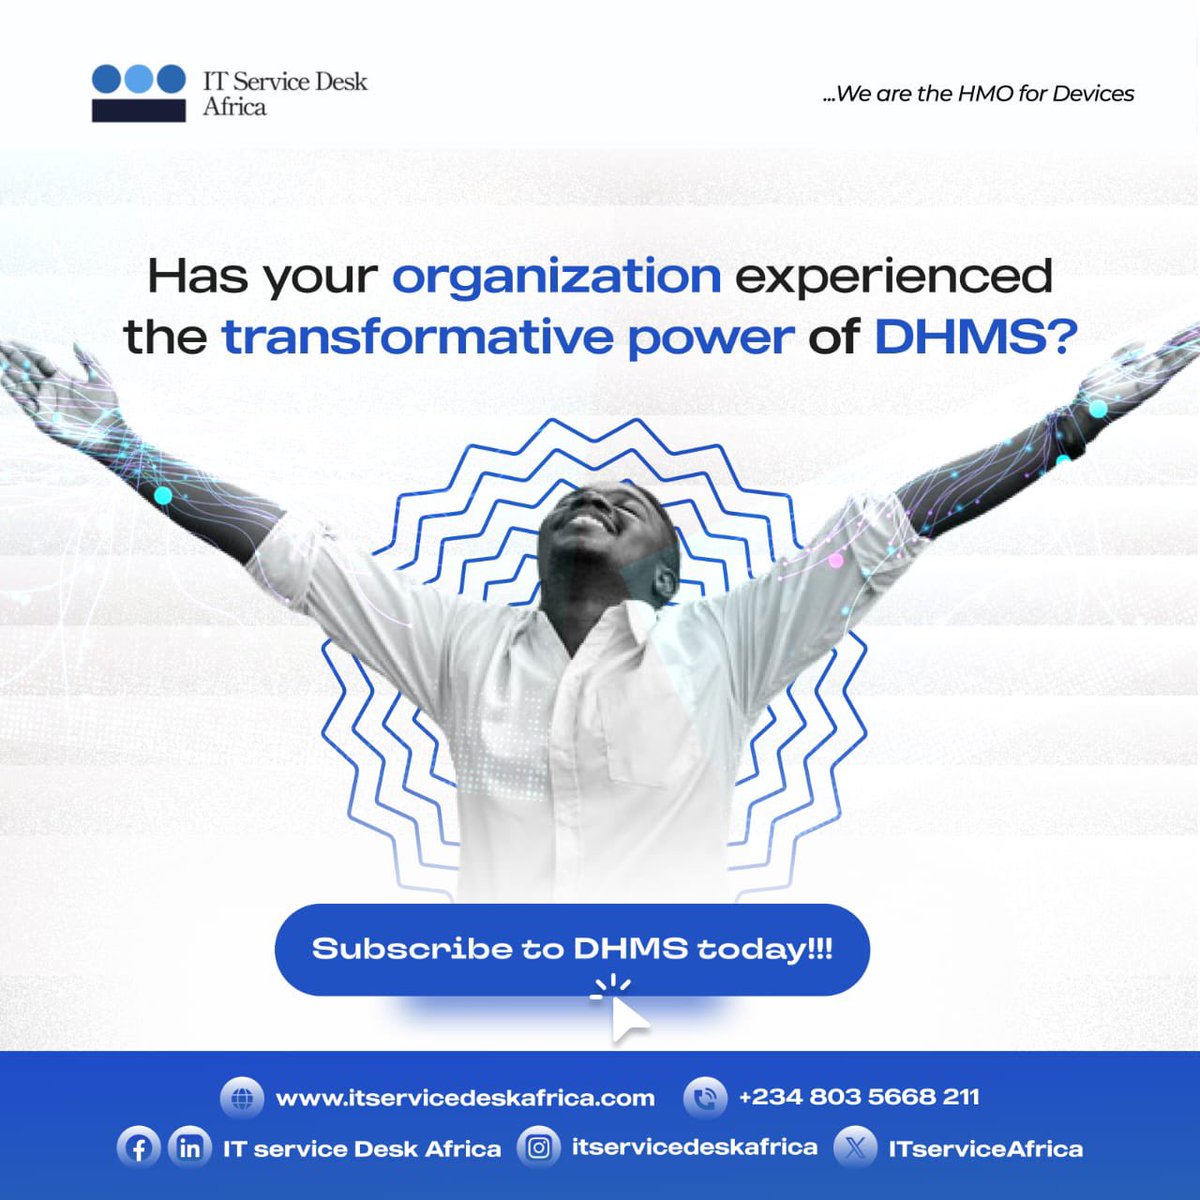 DHMS is Africa’s first subscription-based service that ensures your laptop and desktop devices stay healthy and operate seamlessly.

Sign up for free!

dhms.itservicedeskafrica.com/signup/

#FreeSignup #DHMS #ITSA